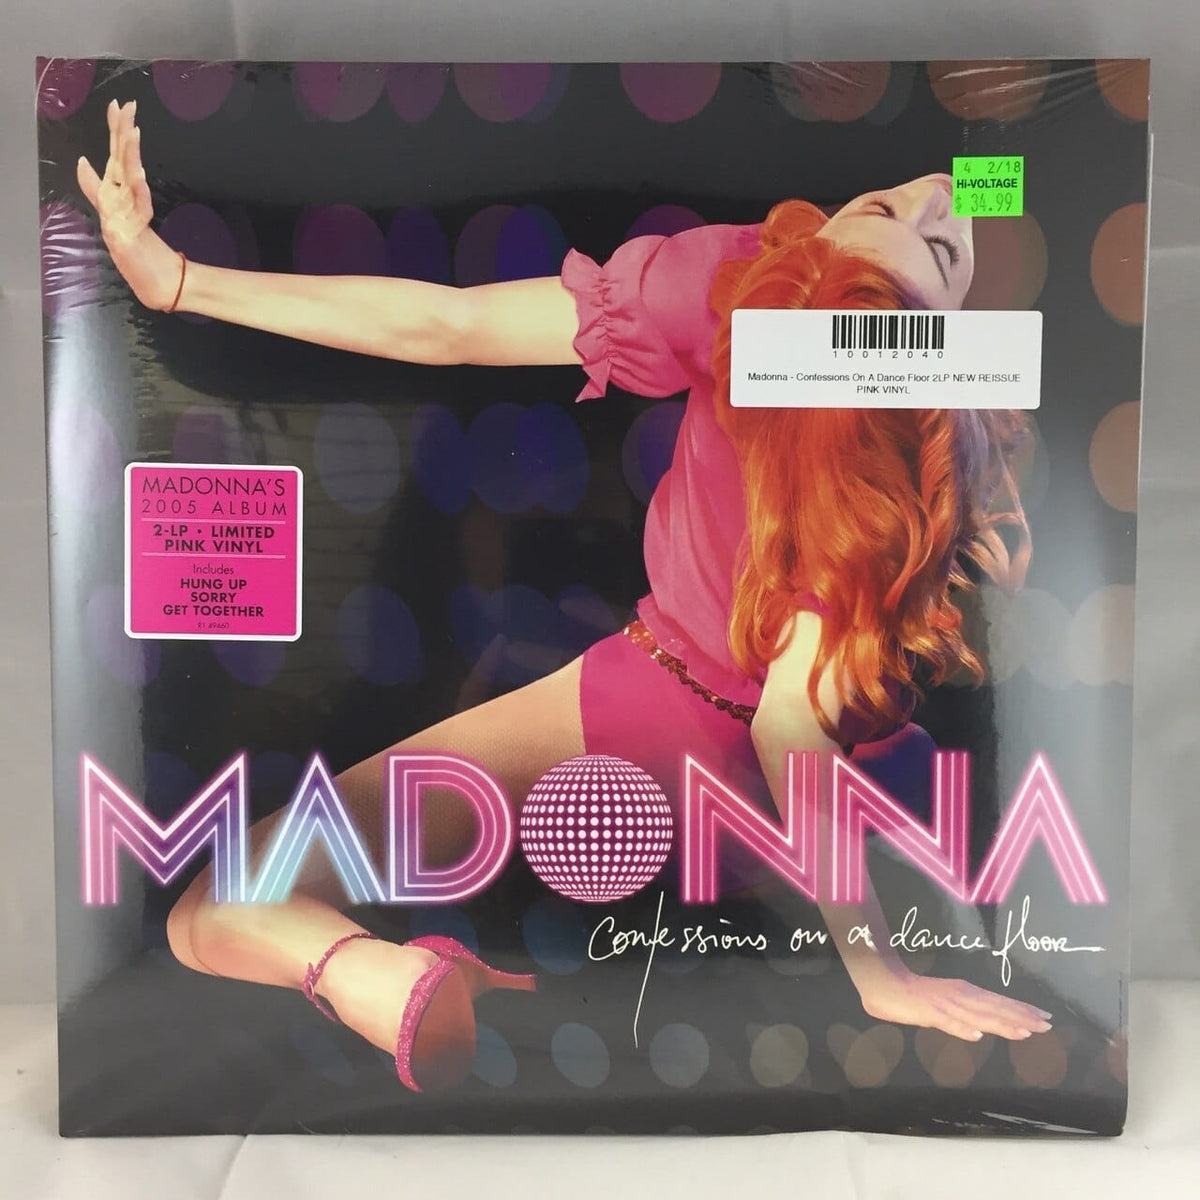 Madonna - Confessions On A Dance Floor 2LP NEW REISSUE